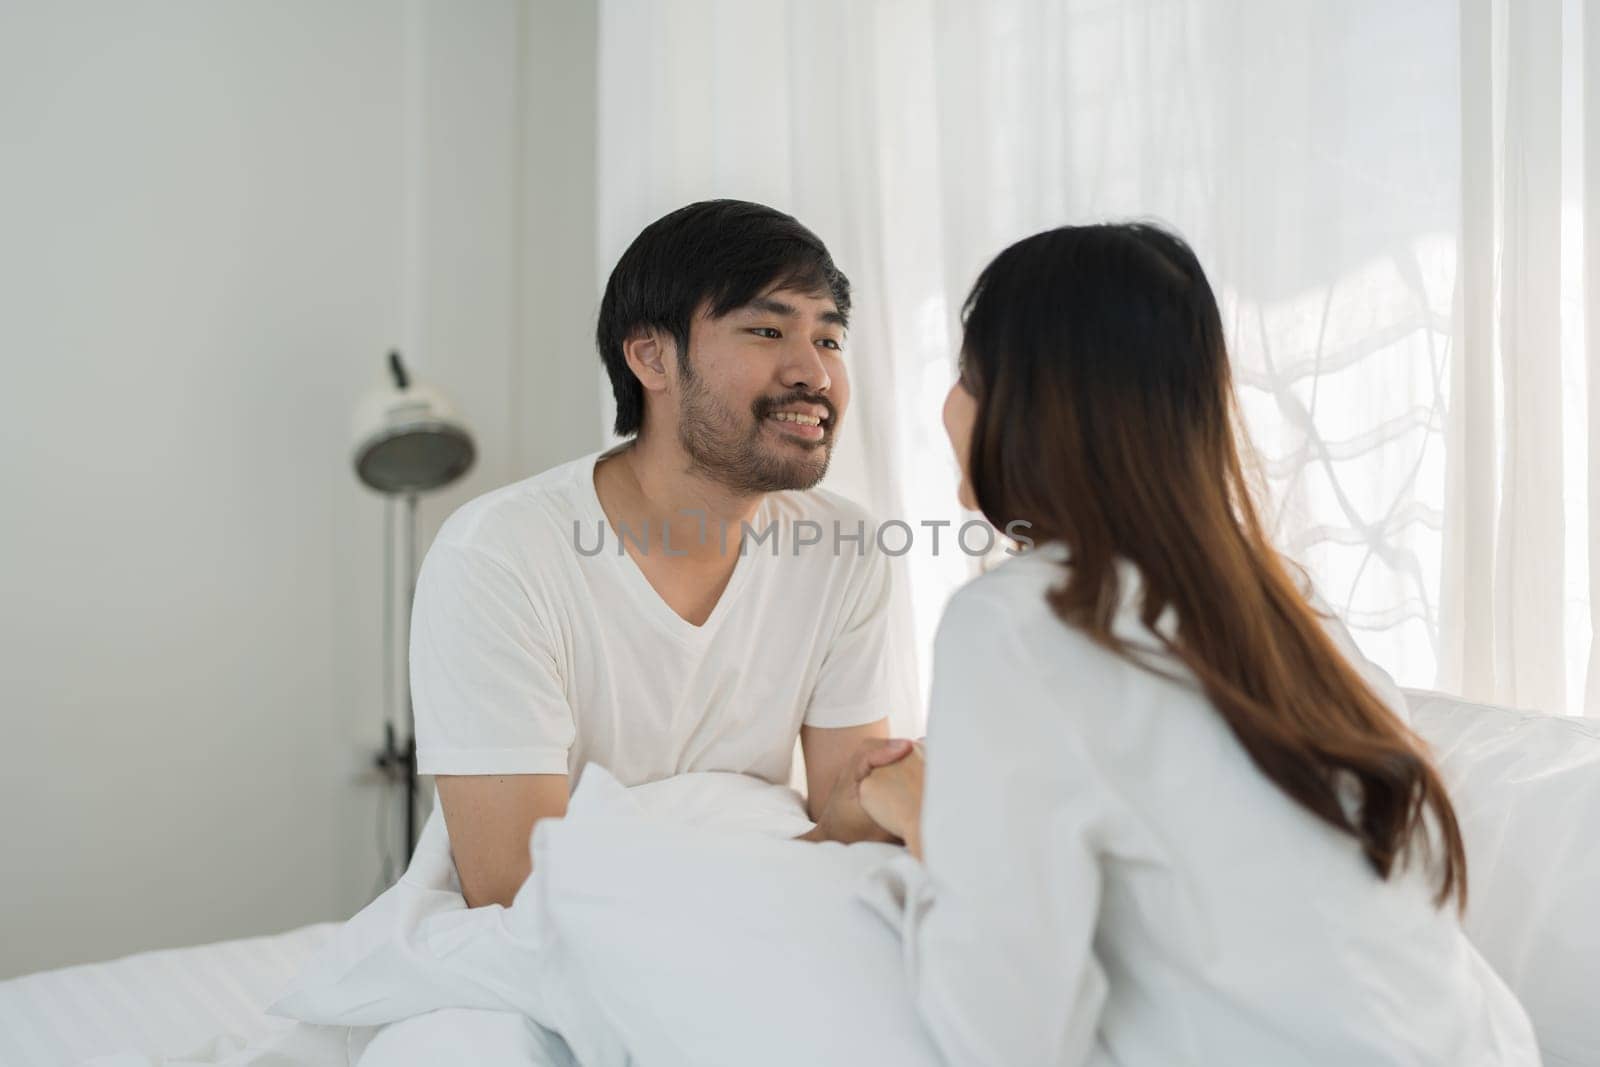 Asian Romantic couple in bed enjoying sensual foreplay Happy sensual young couple lying in bed together. Beautiful loving couple kissing in bed